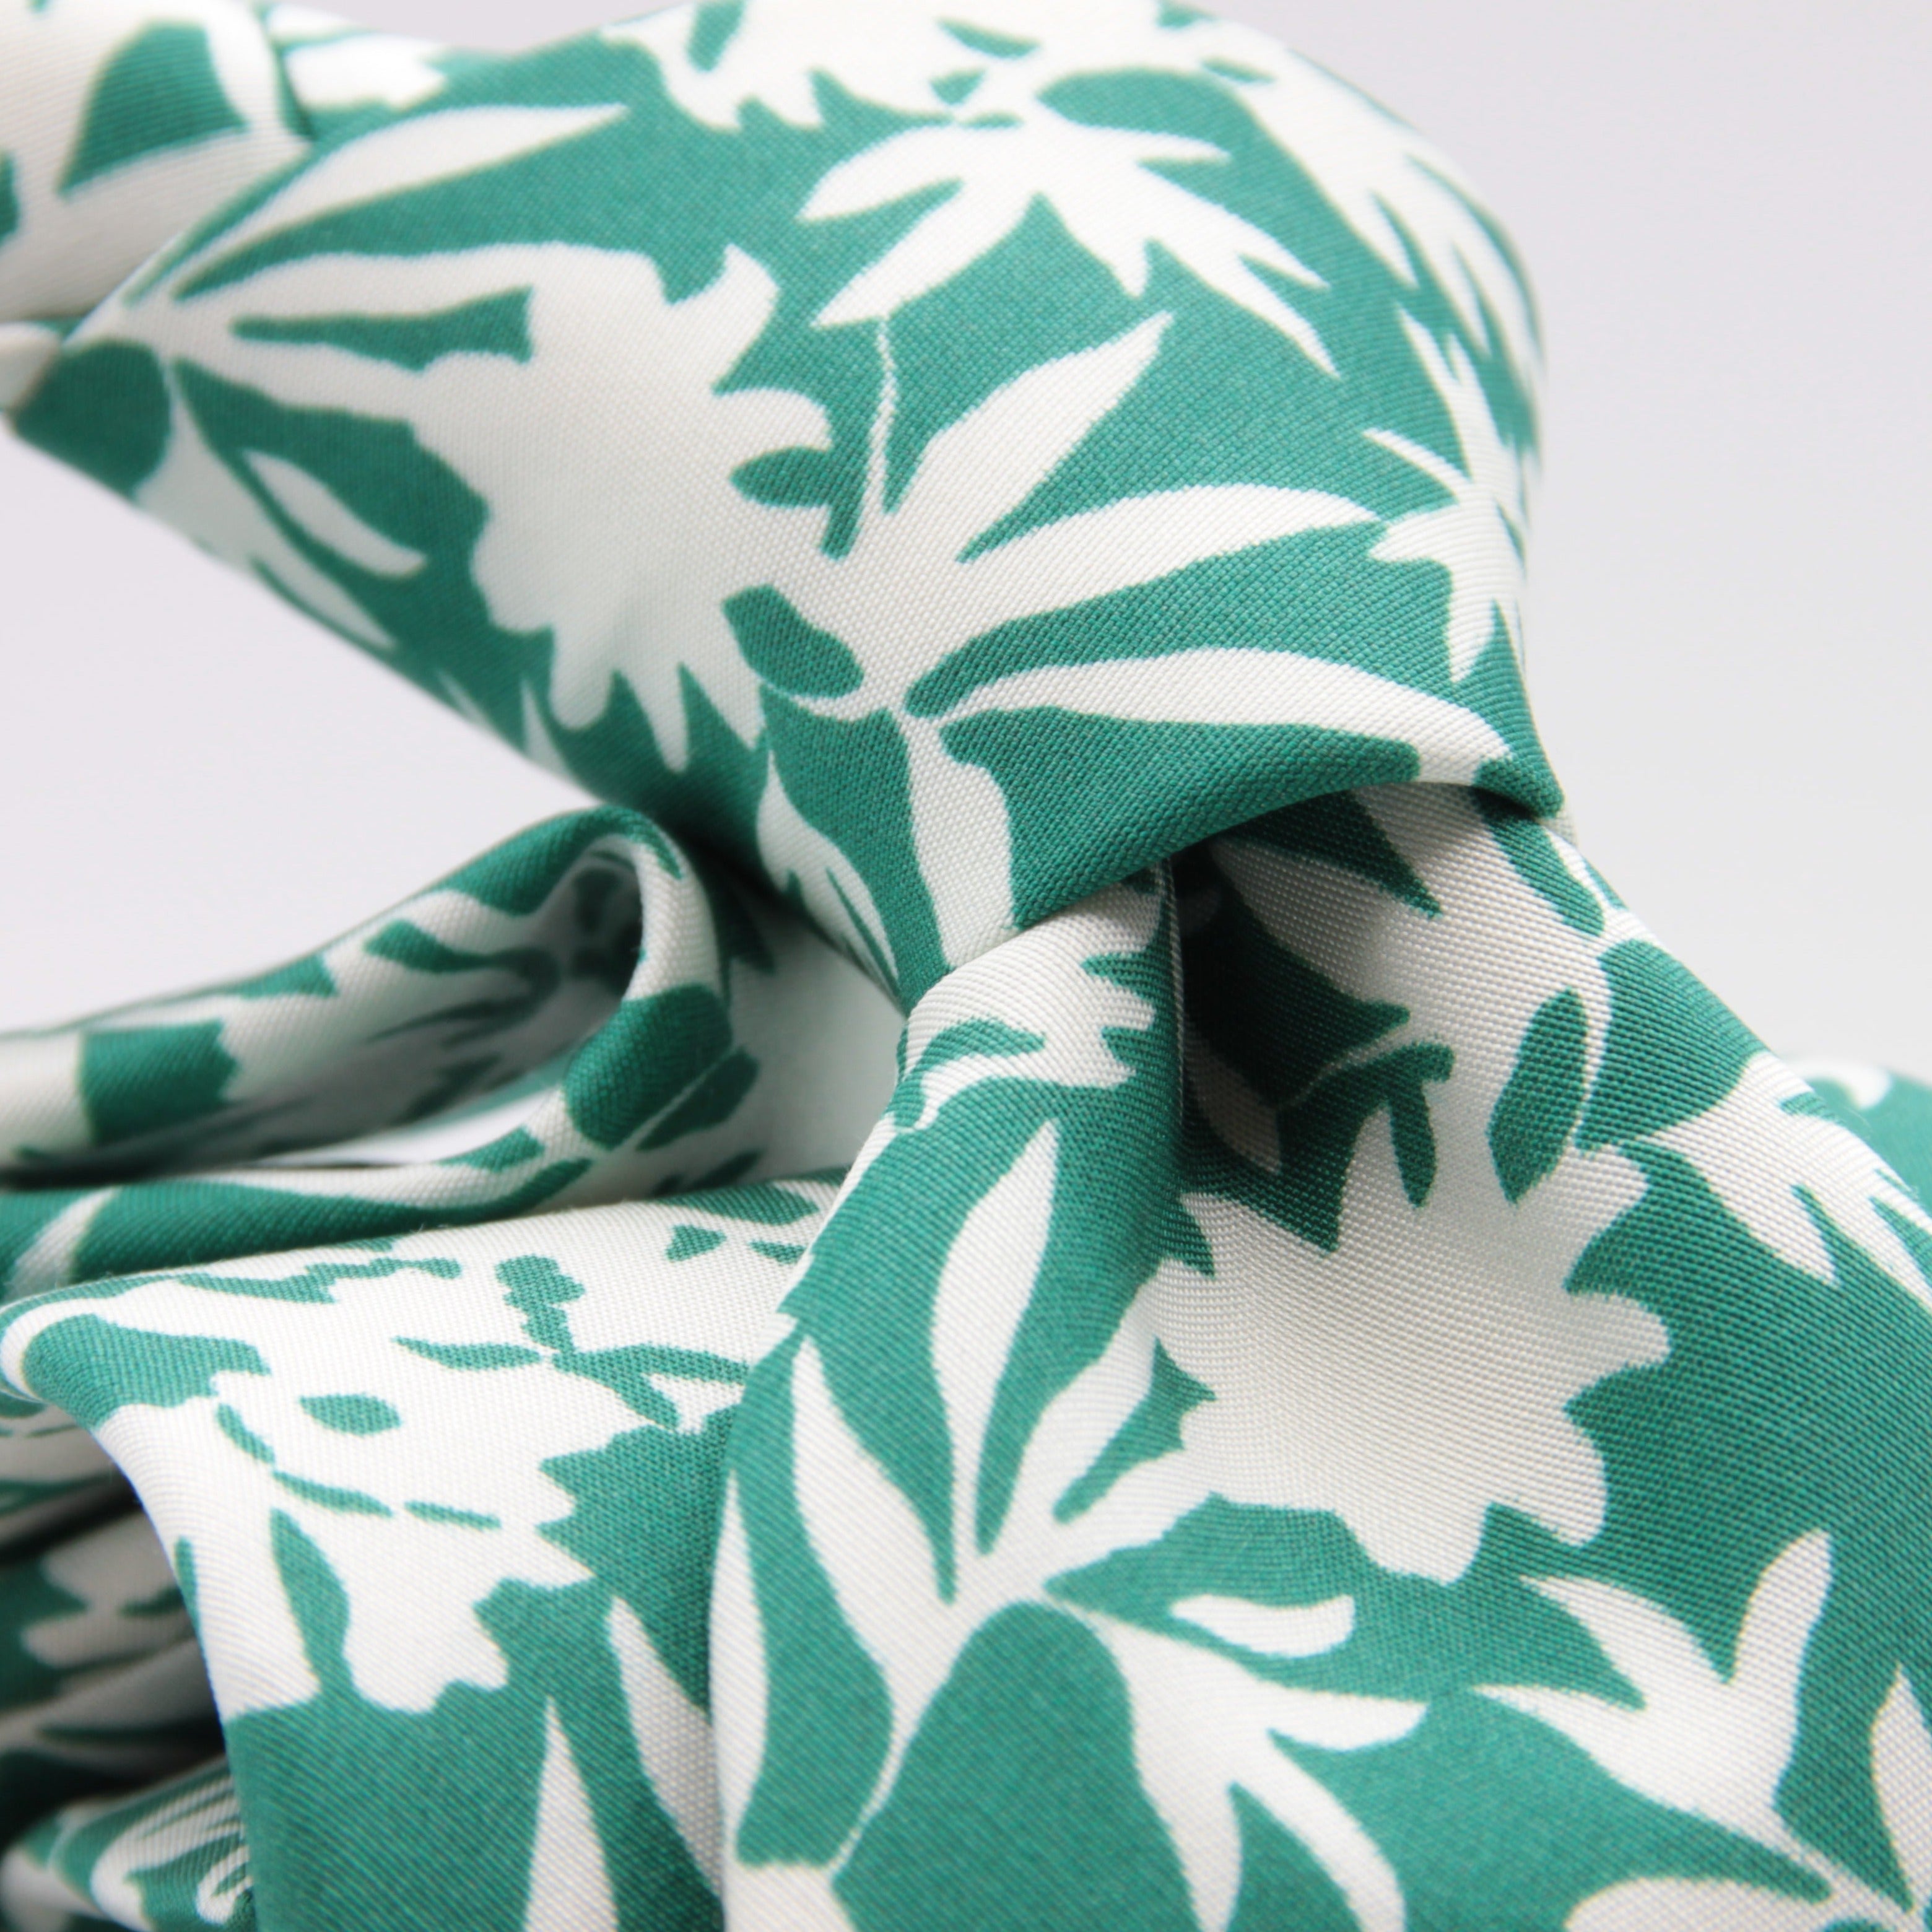 Drake's for Cruciani e Bella 100%  Printed Silk Tipped Green and White Palm Tree Motif Tie 36 oz Handmade in London, England 8 cm x 150 cm #3171